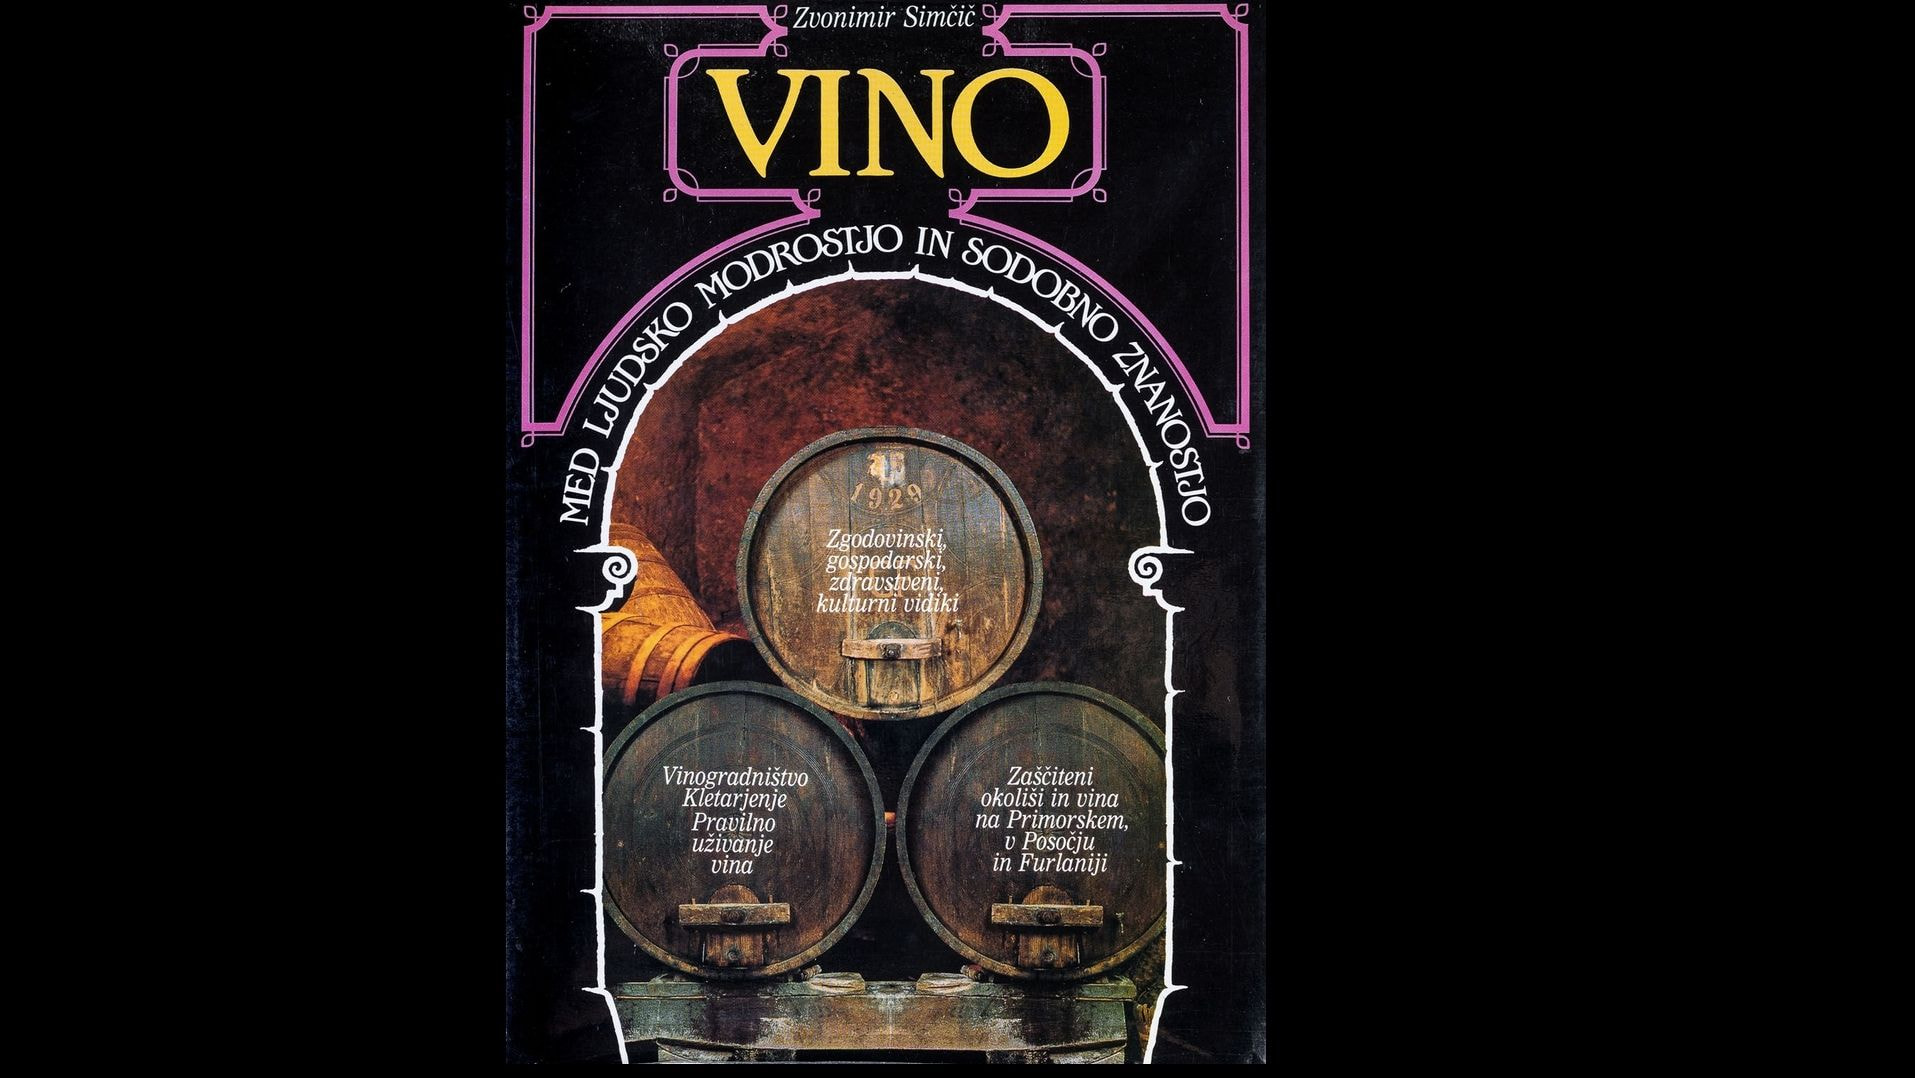 Book from the heart of Zvonimir Simčič for every vine grower and wine lover.